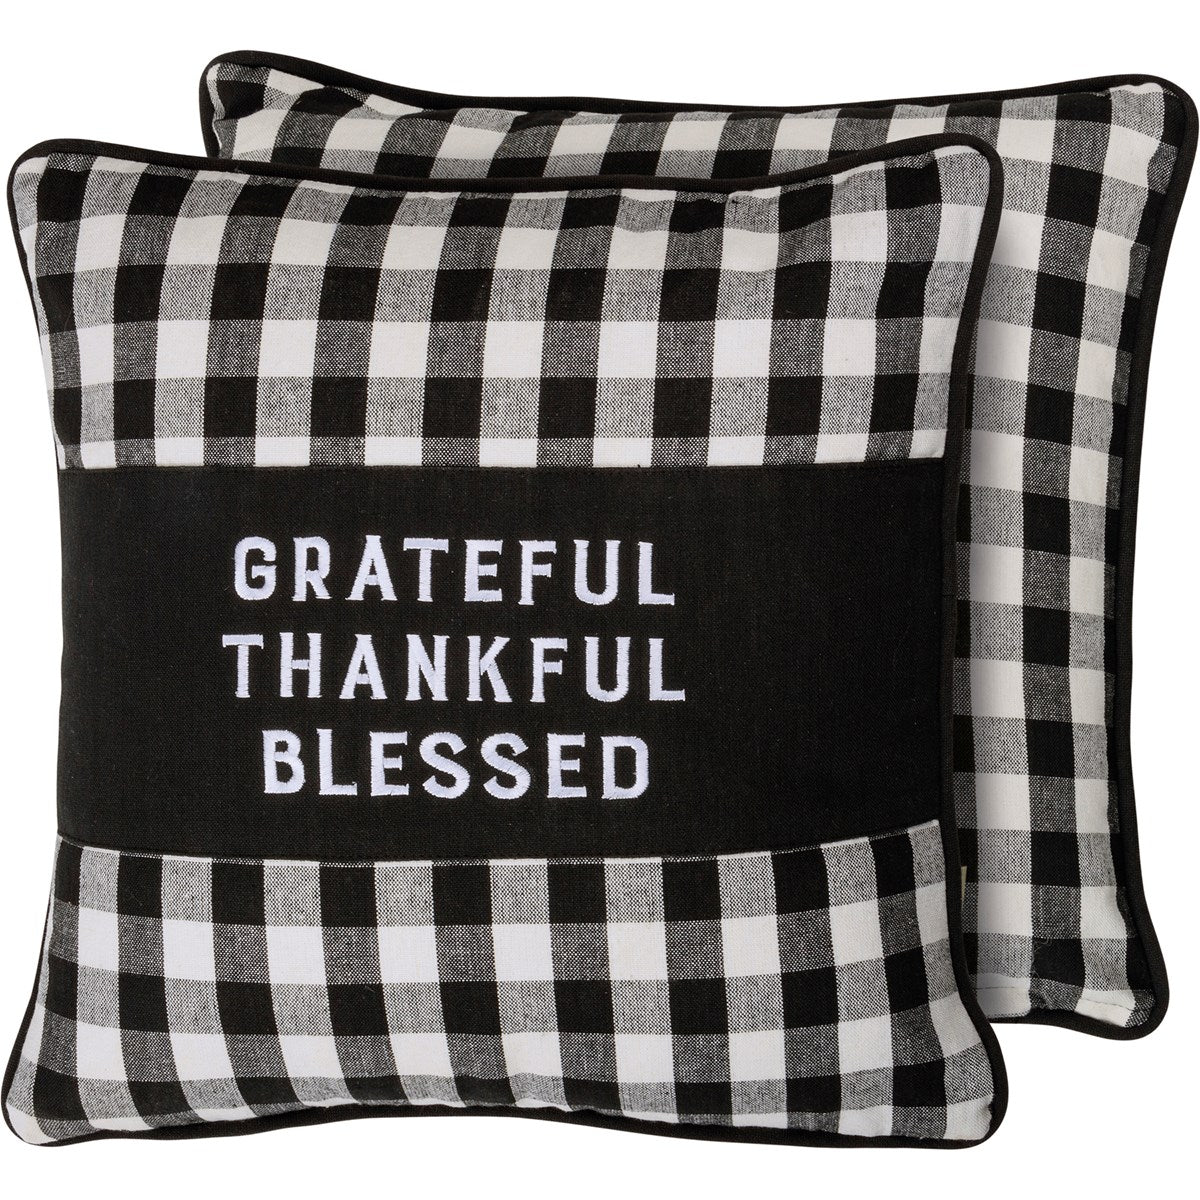 "Thankful" Gingham Check Pillow